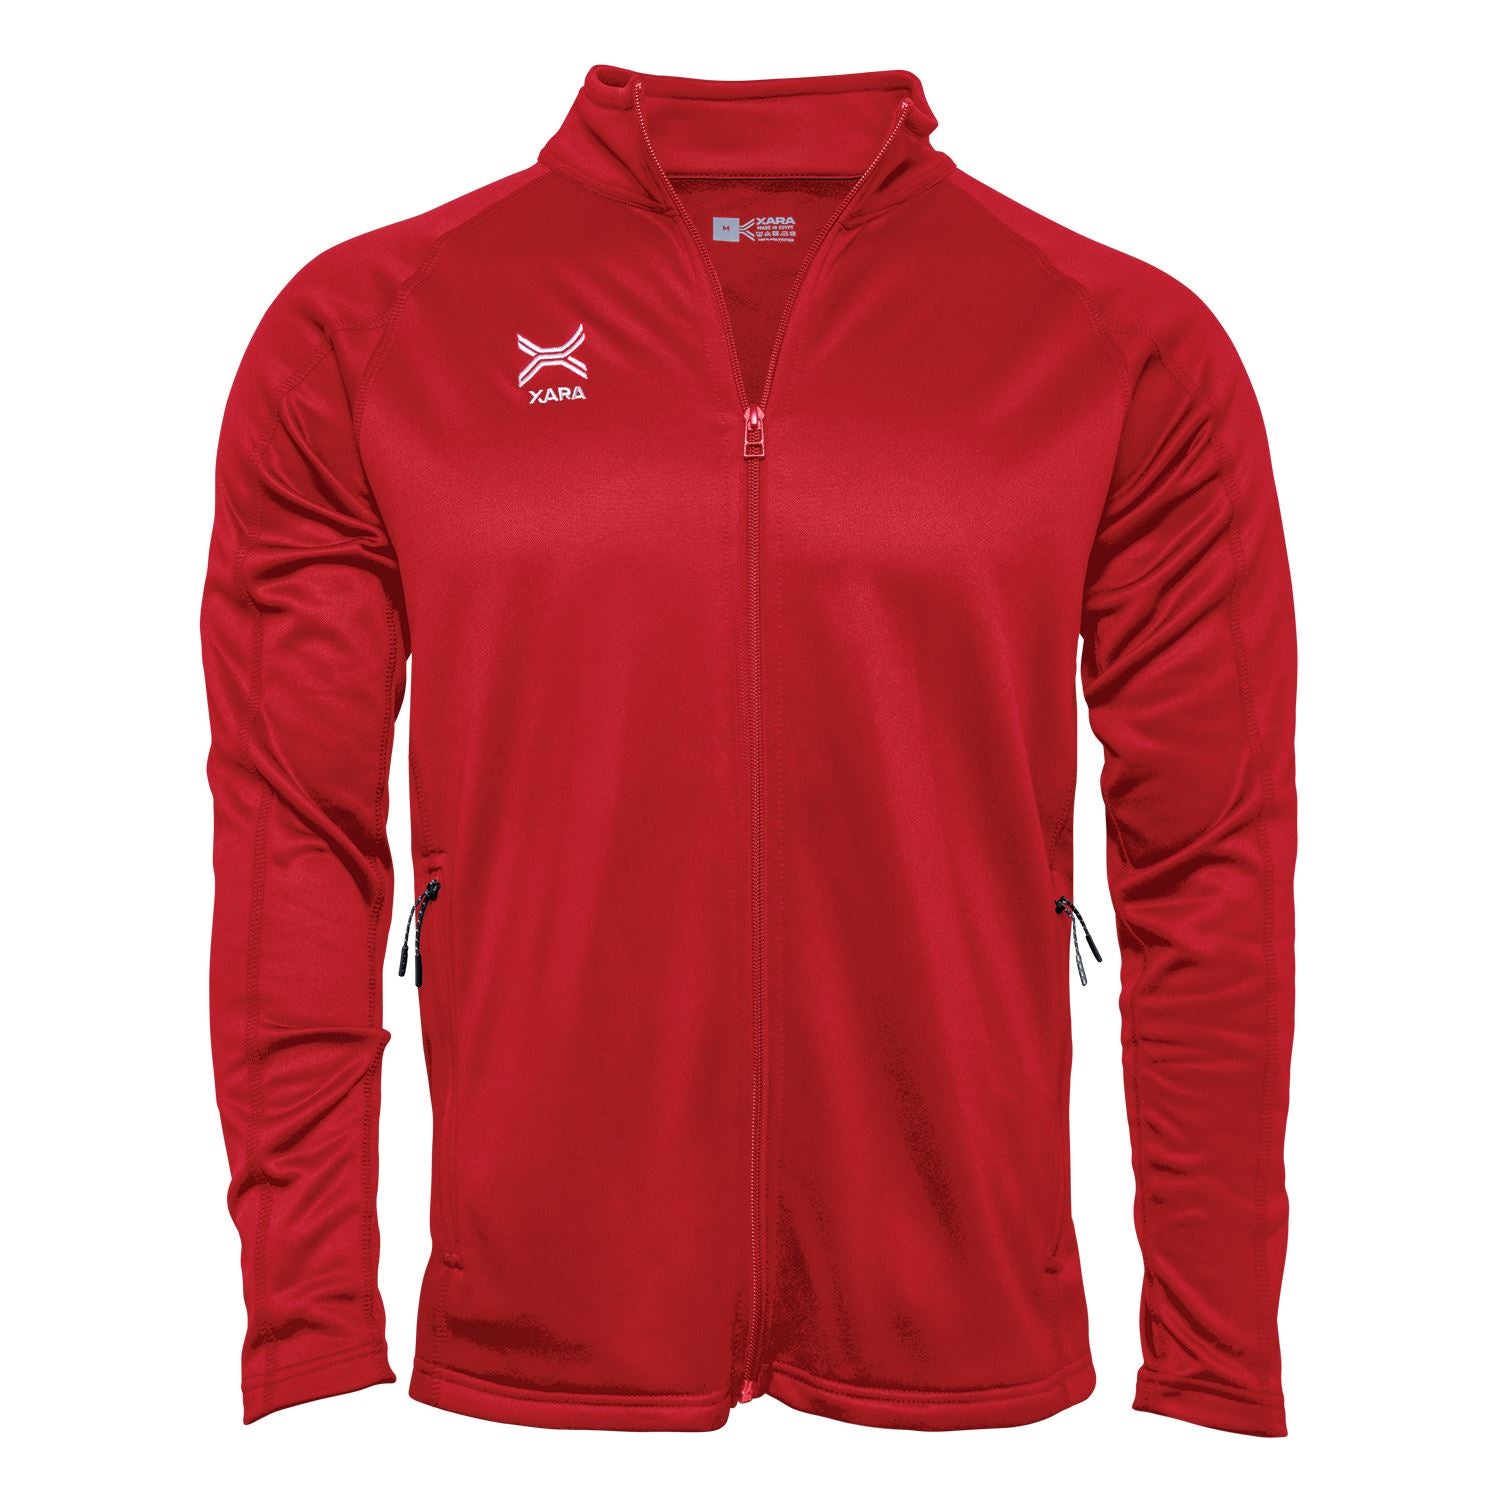 St. James Jacket - Men & Women Outerwear Xara Soccer Red Youth Extra Small Mens